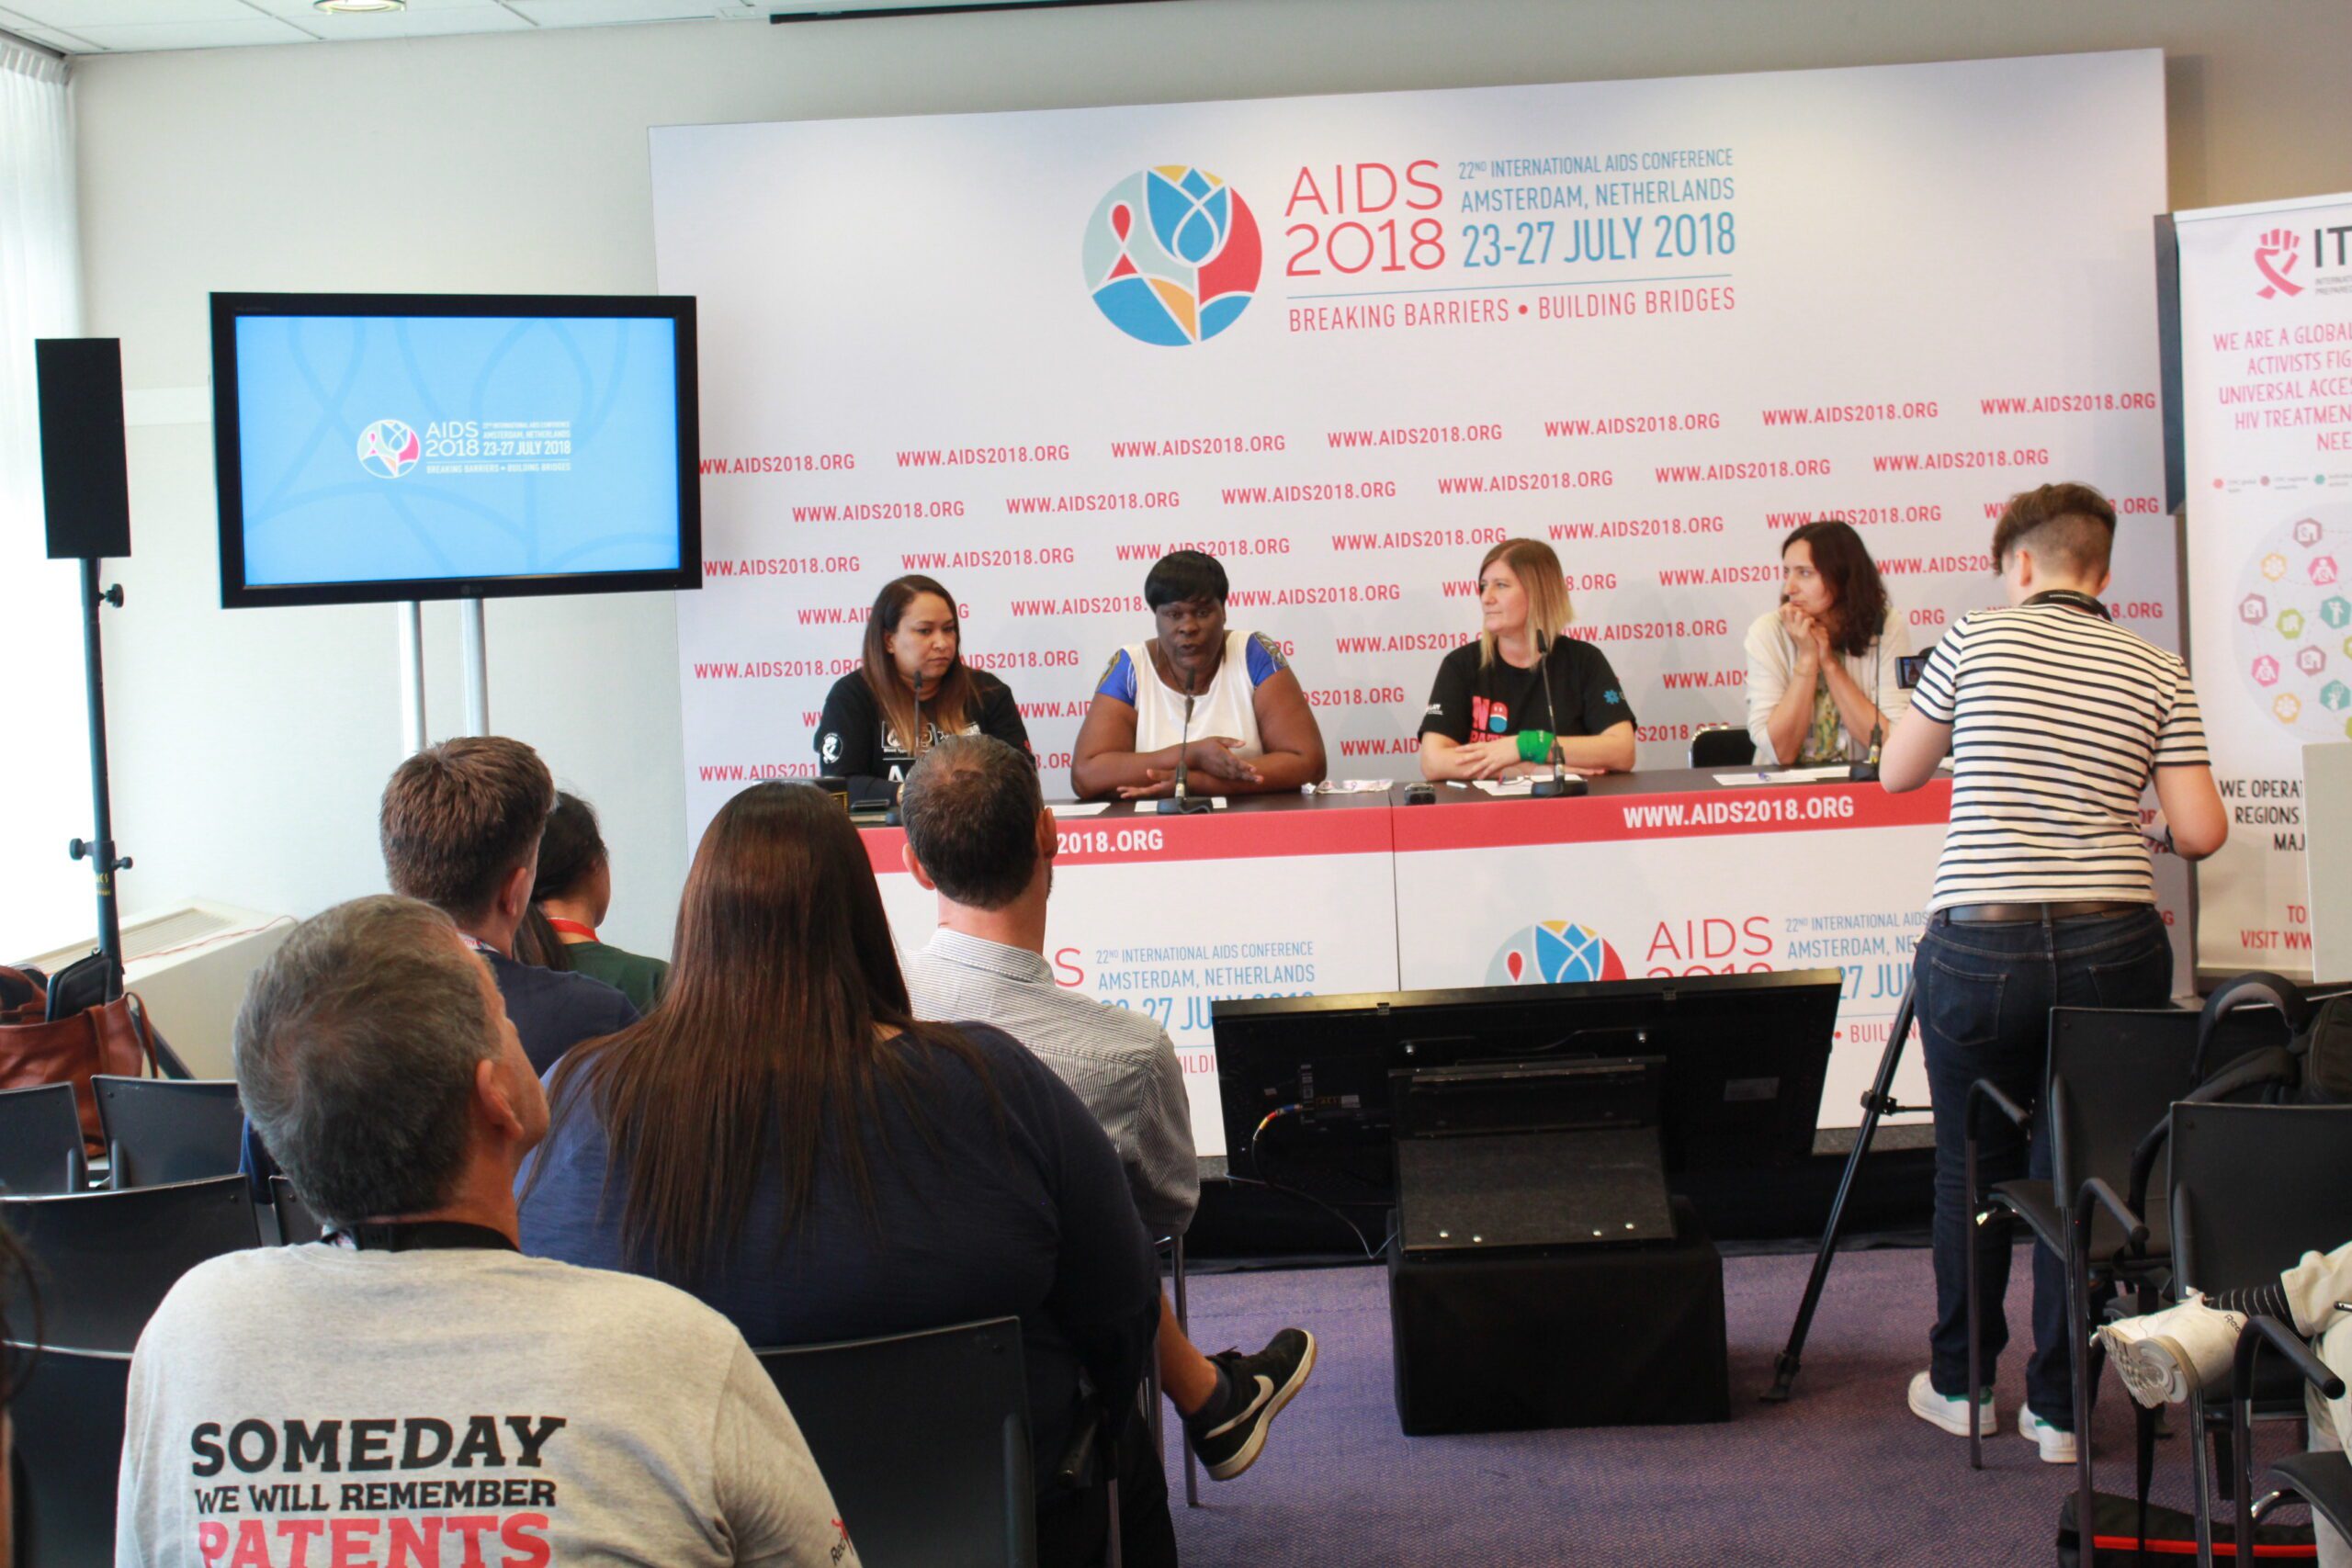 Cutting Through the Noise at AIDS 2018